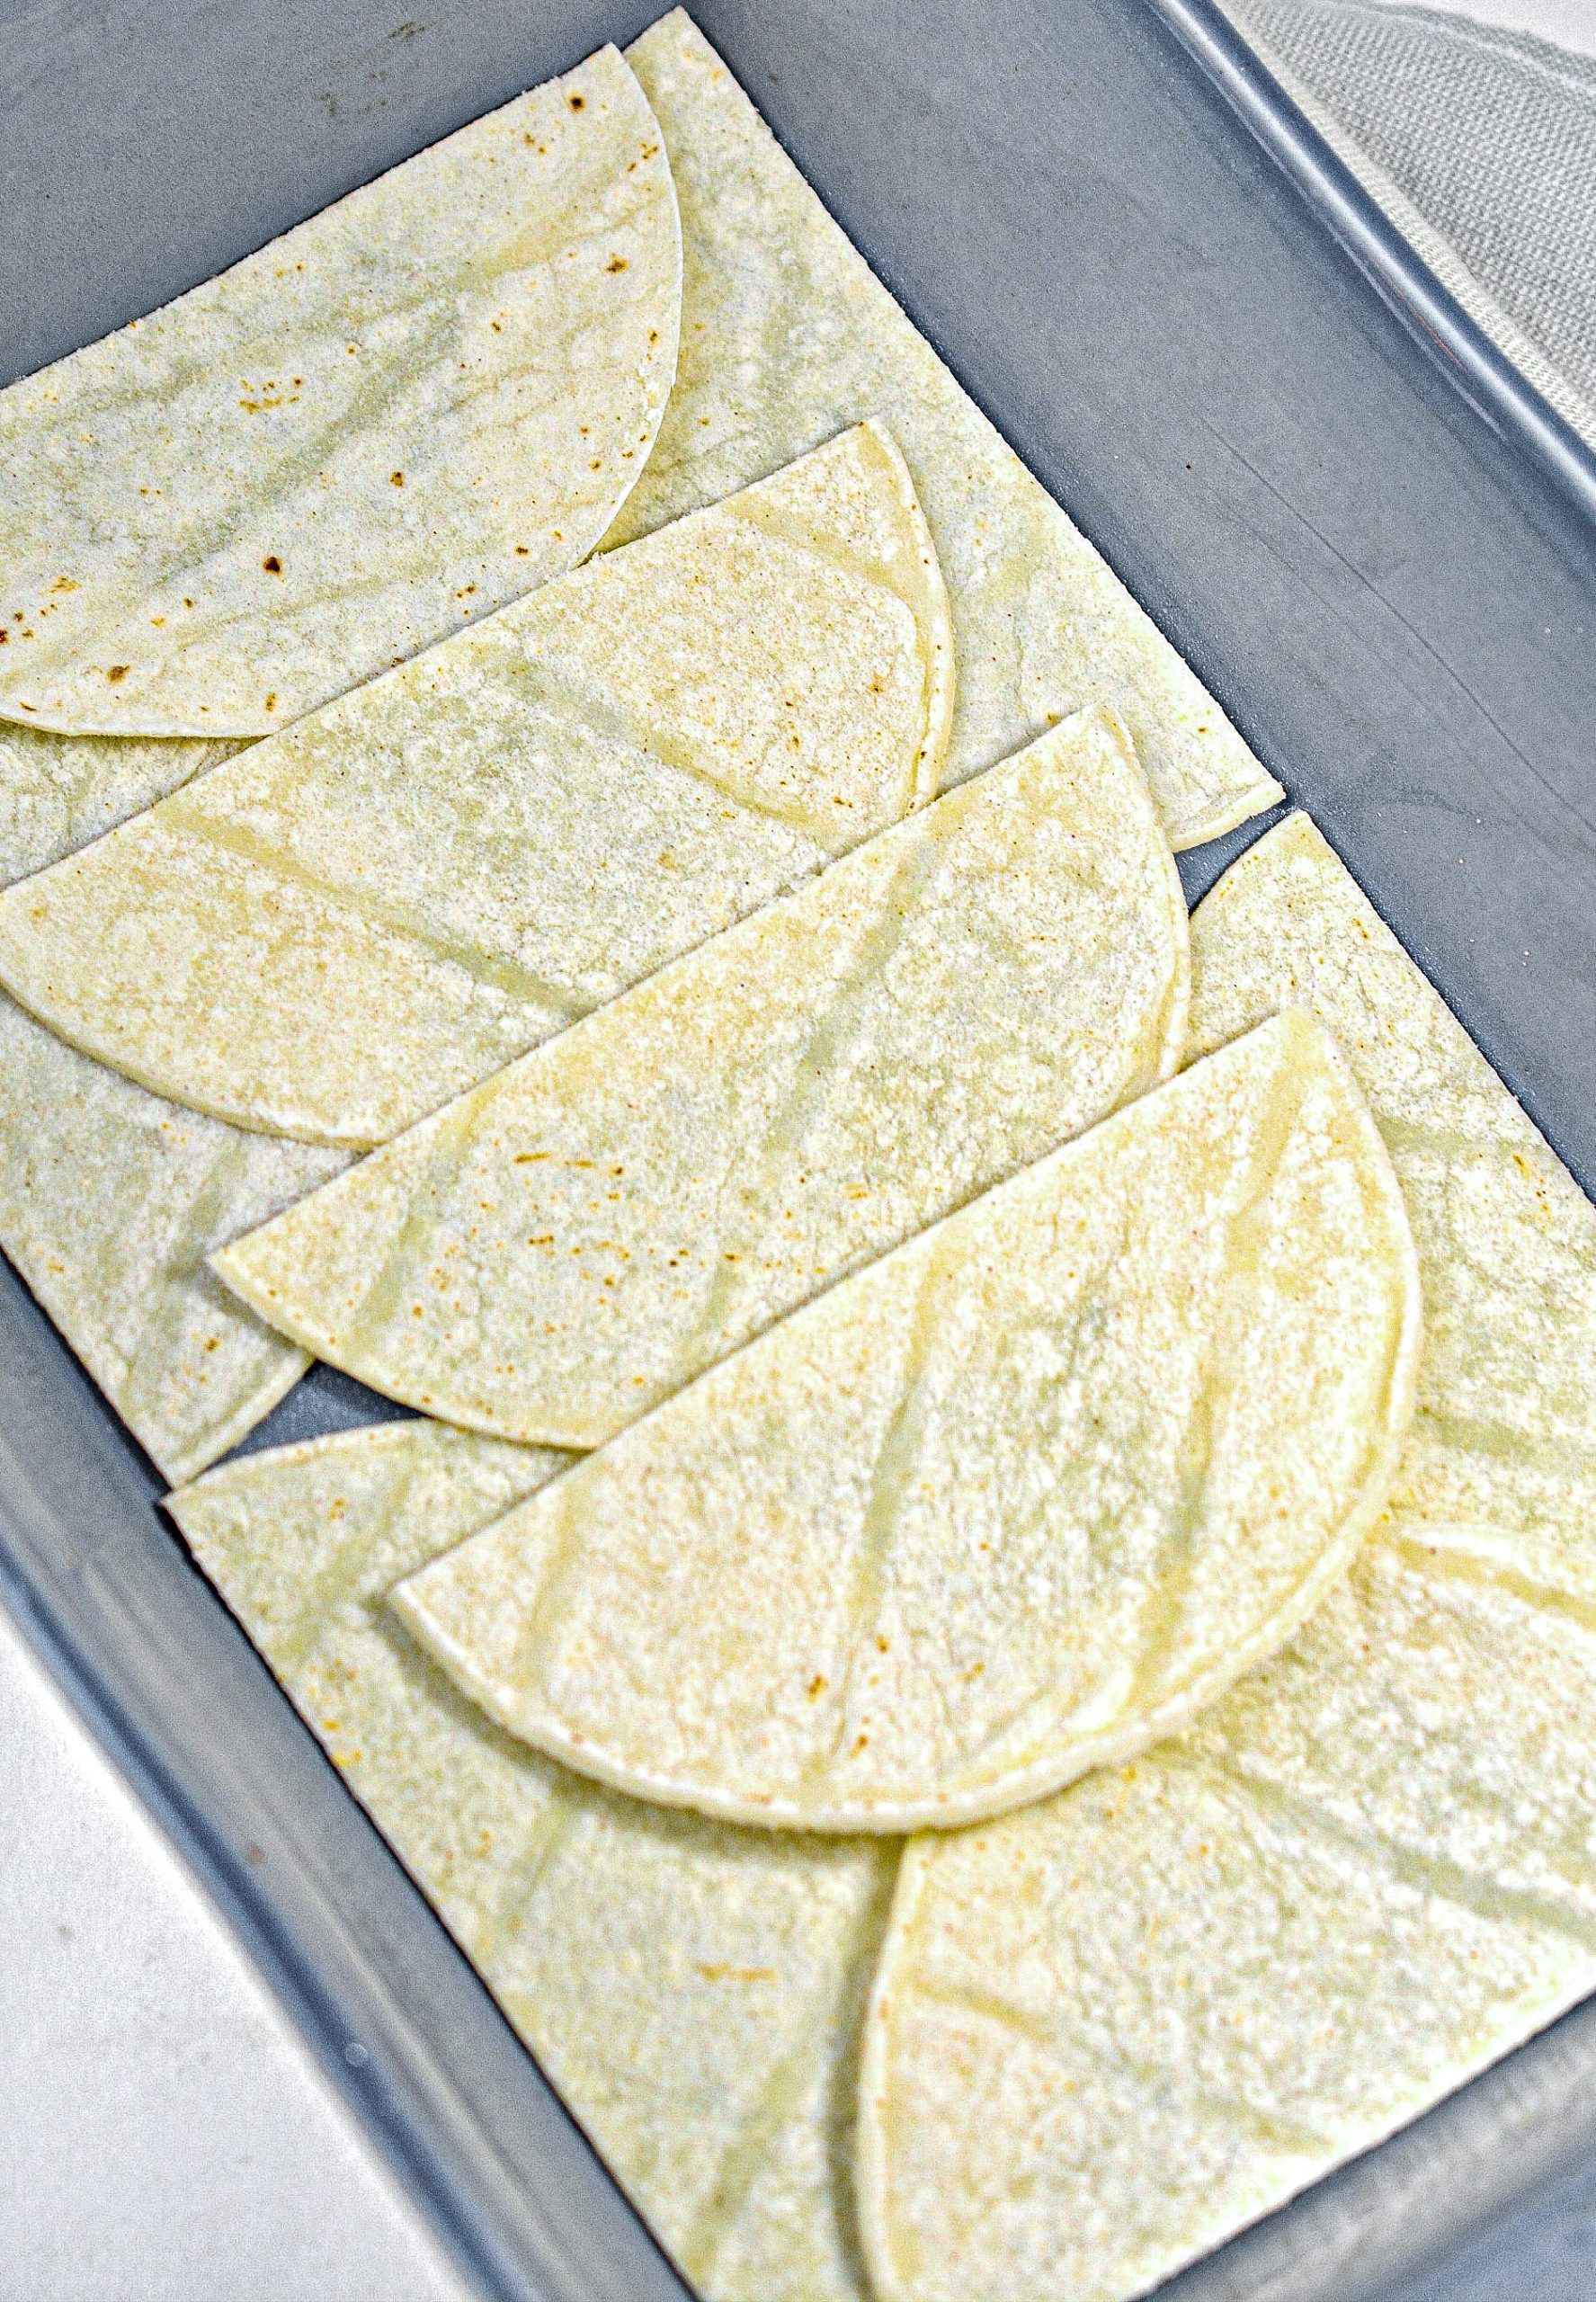 Place a layer of corn tortilla in the bottom of a well-greased 9x13 baking dish.